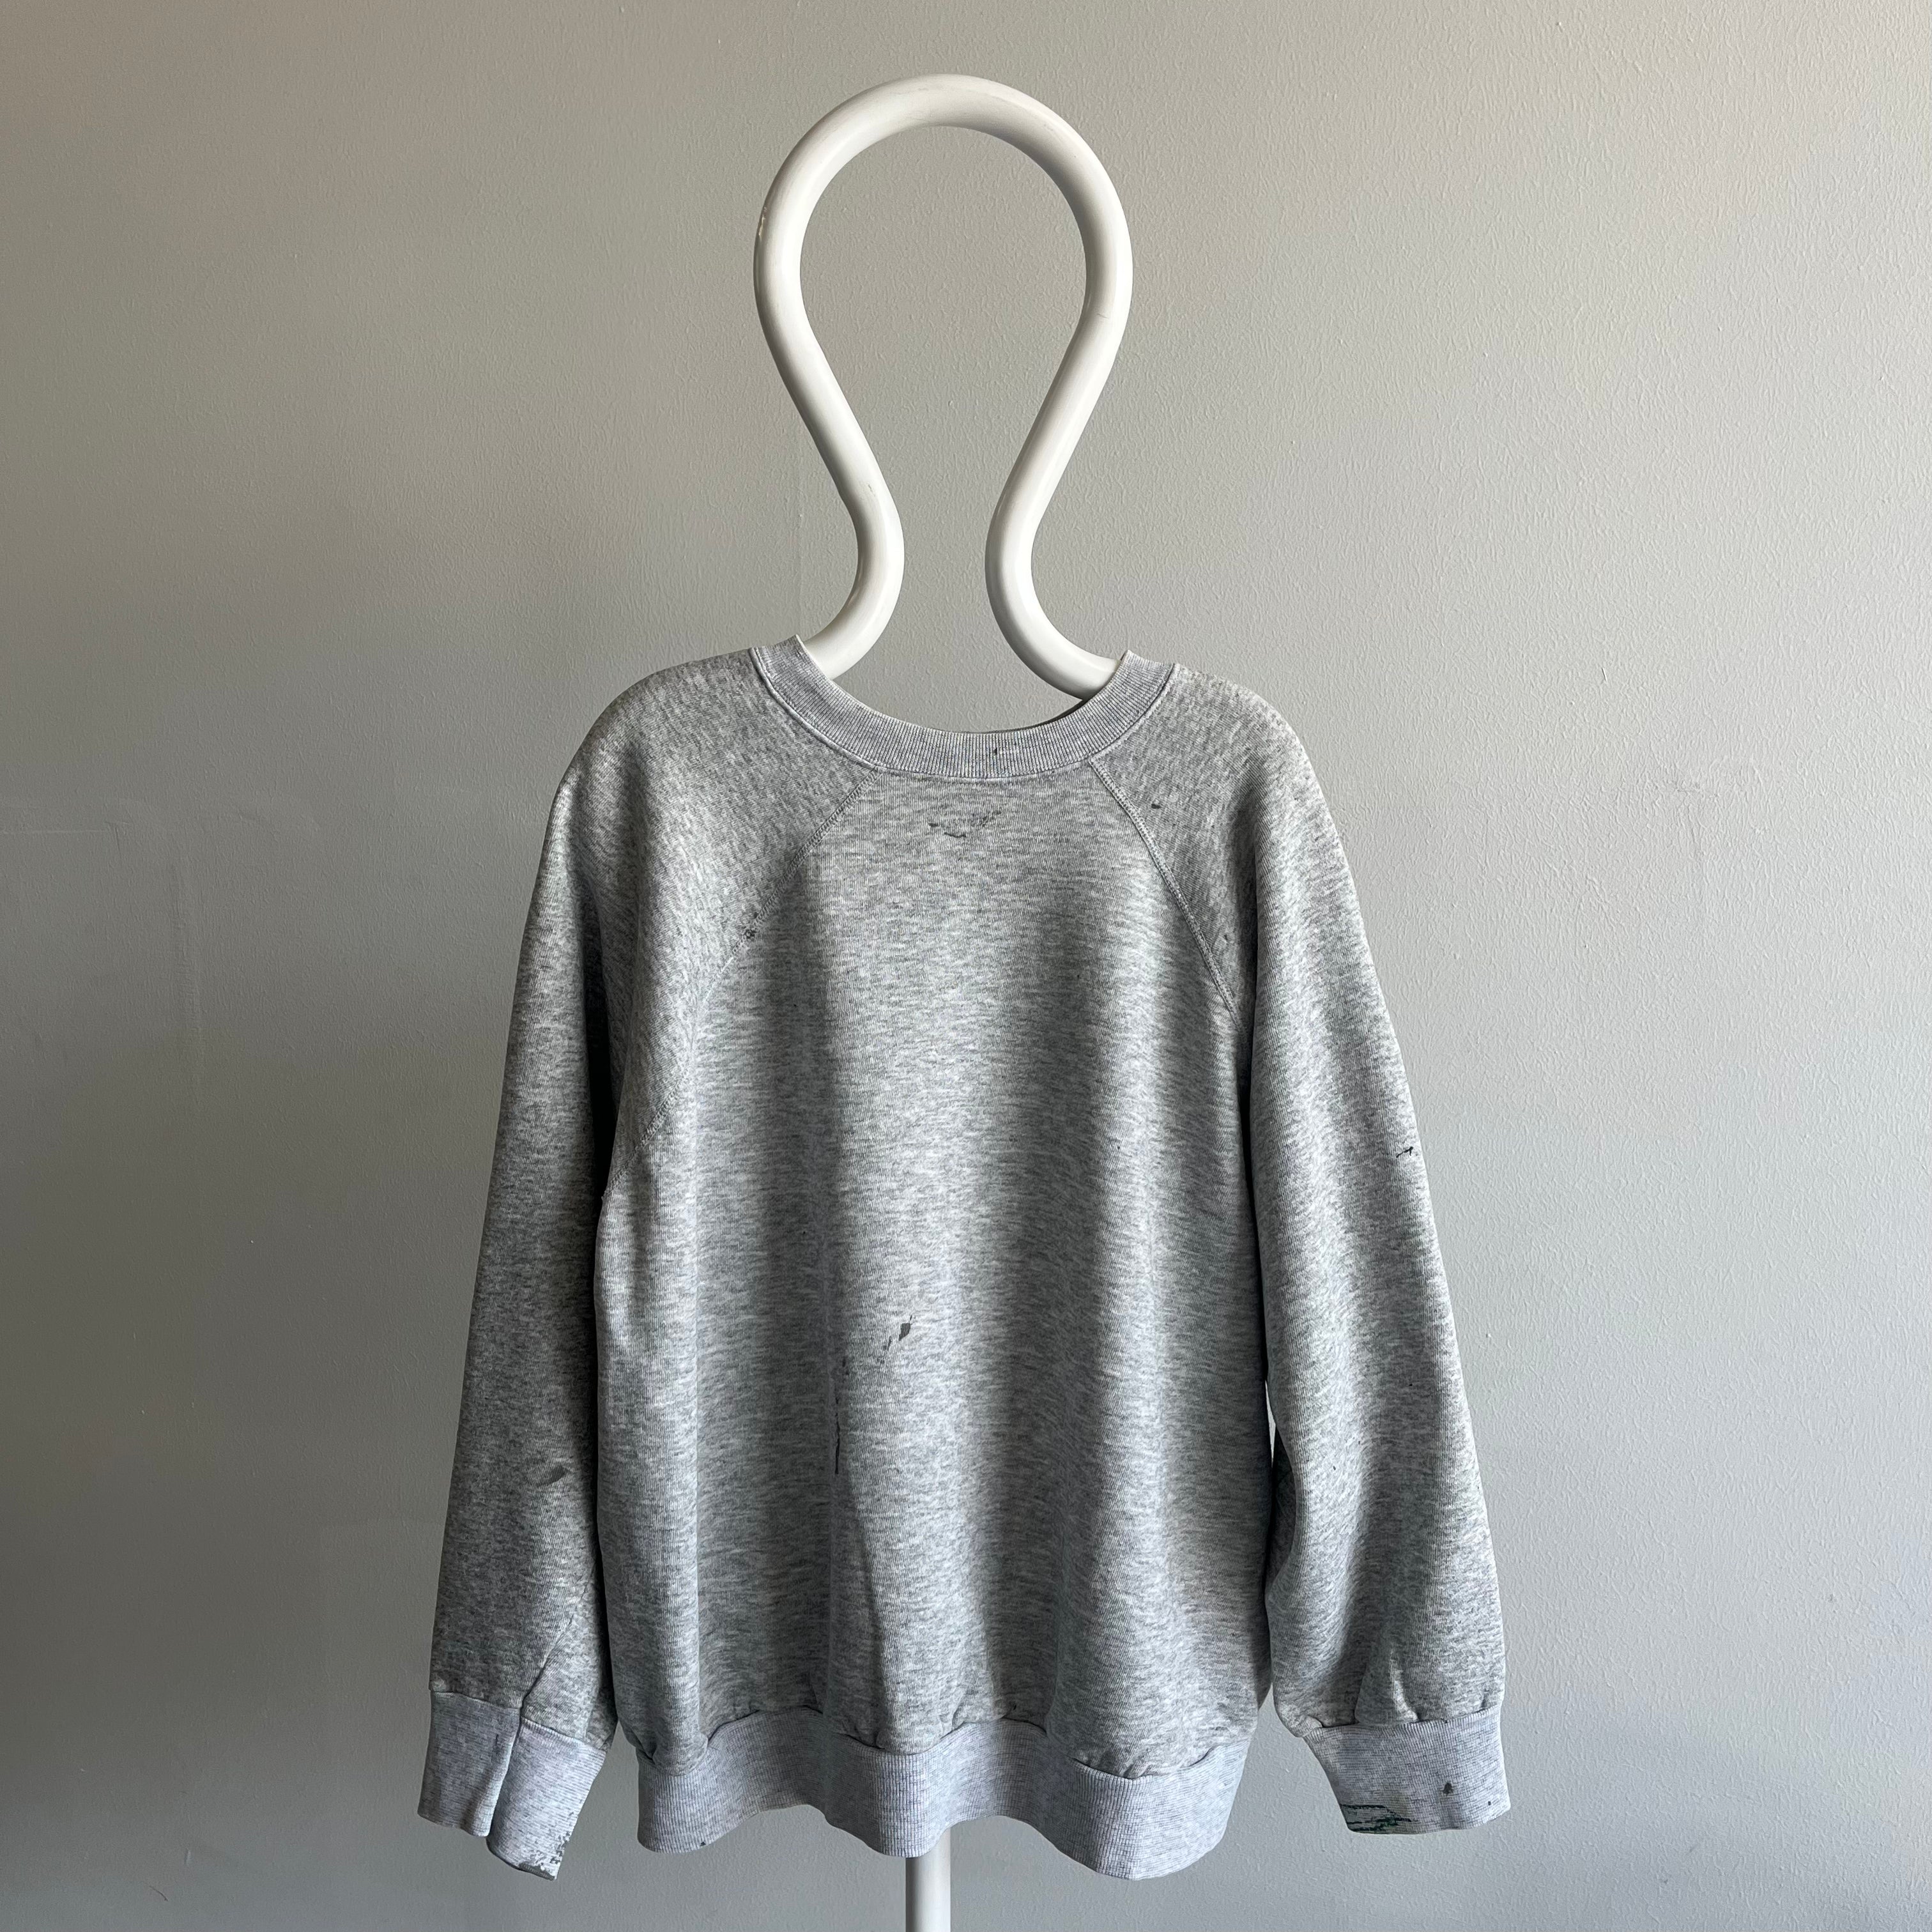 1990s Relaxed Paint Stained Cozy Gray Sweatshirt